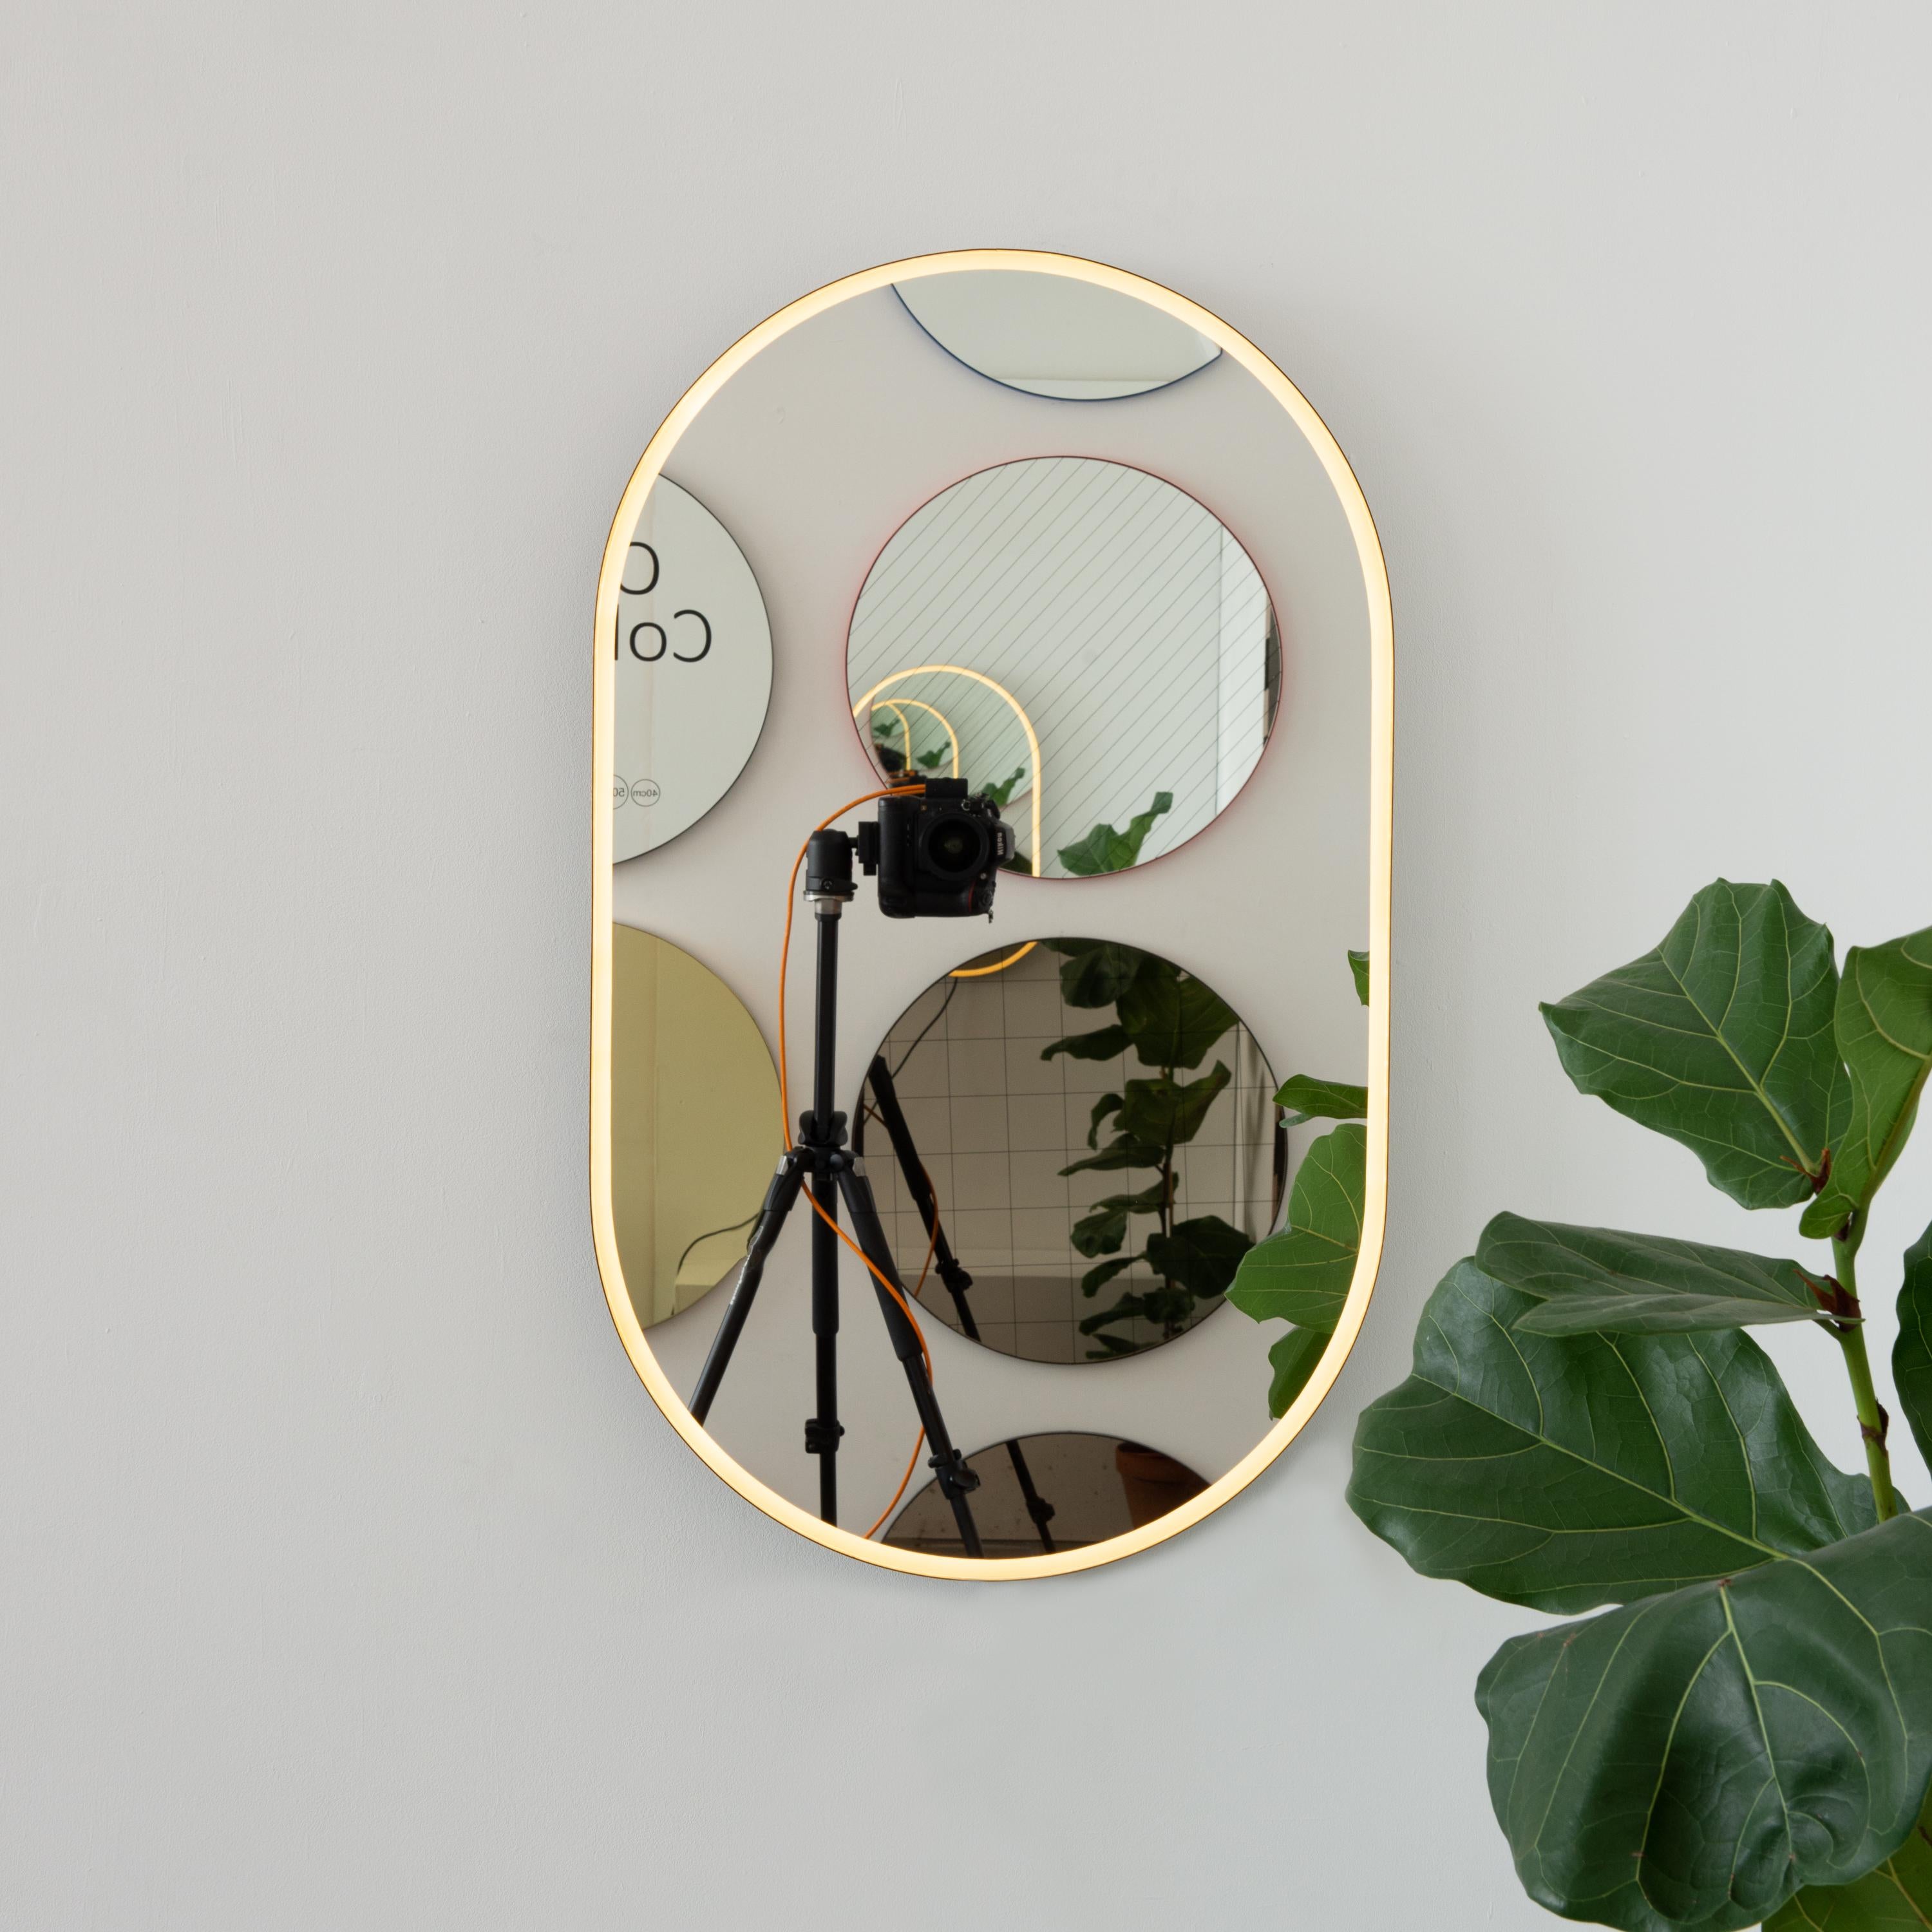 Modern handcrafted front illuminated capsule shaped mirror with an elegant bronze patina brass frame. Designed and handcrafted in London, UK.

Our mirrors are designed with an integrated French cleat (split batten) system that ensures the mirror is